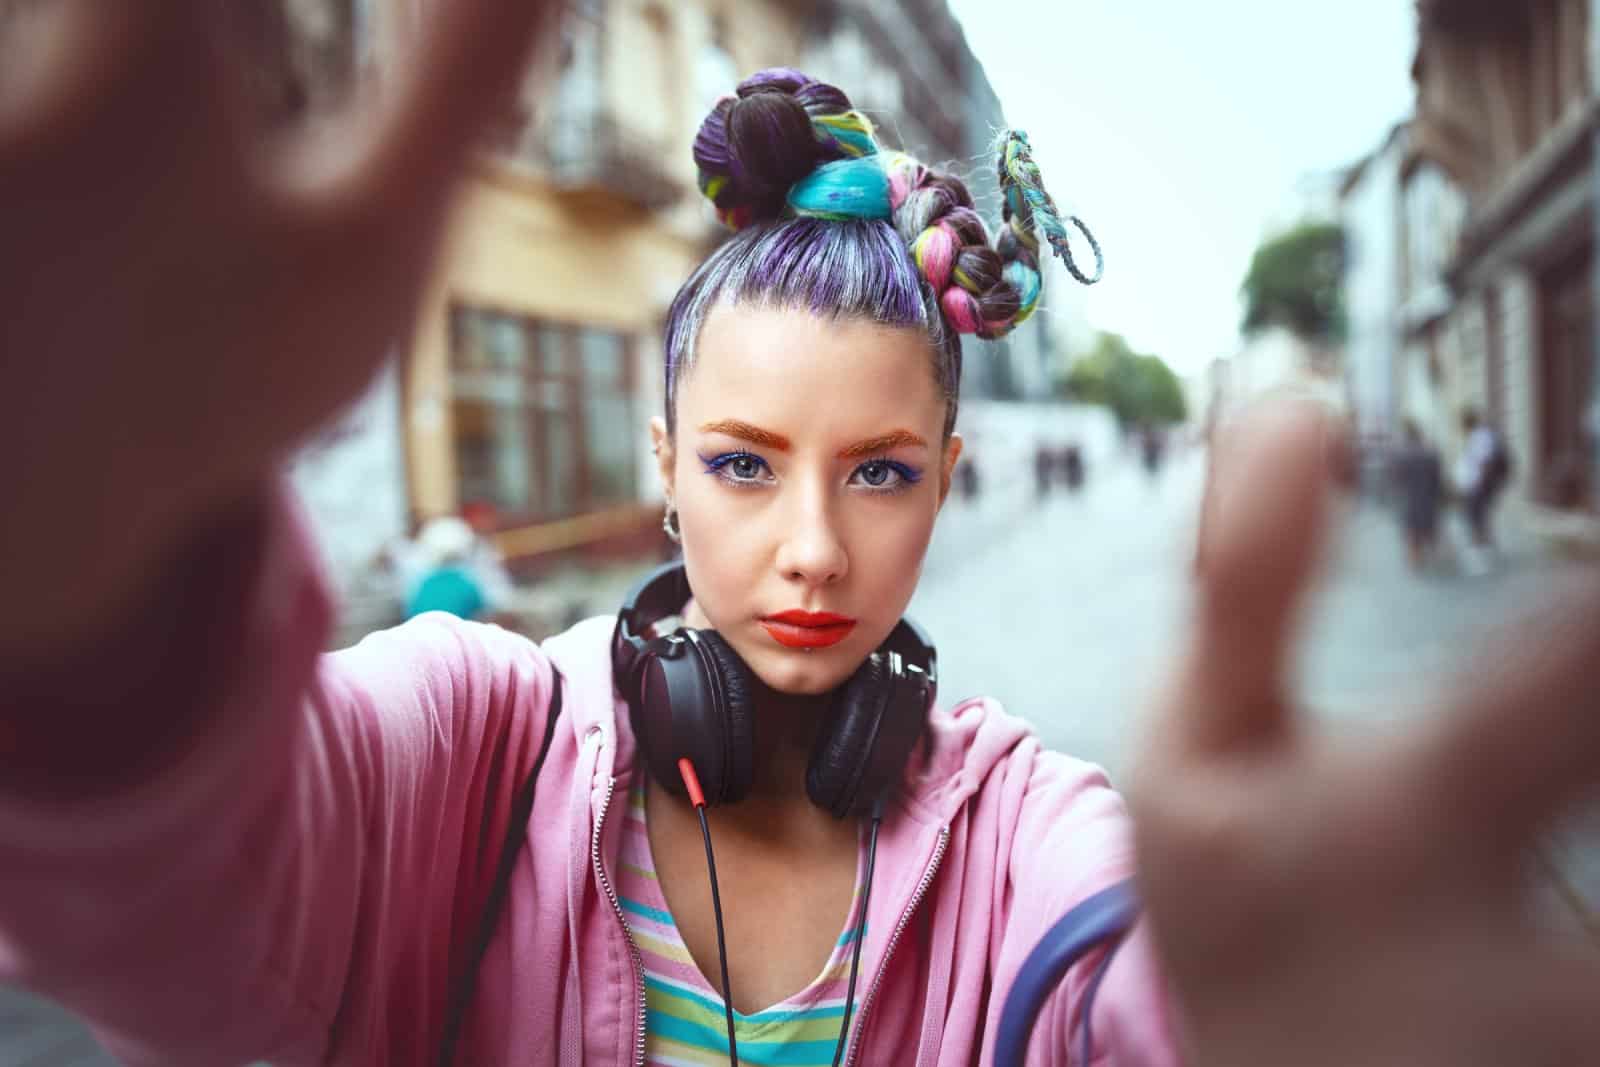 <p class="wp-caption-text">Image Credit: Shutterstock / Dan Rentea</p>  <p><span>A pair of headphones can be a universal “do not disturb” sign when you’re not in the mood for conversation or unwanted attention.</span></p>